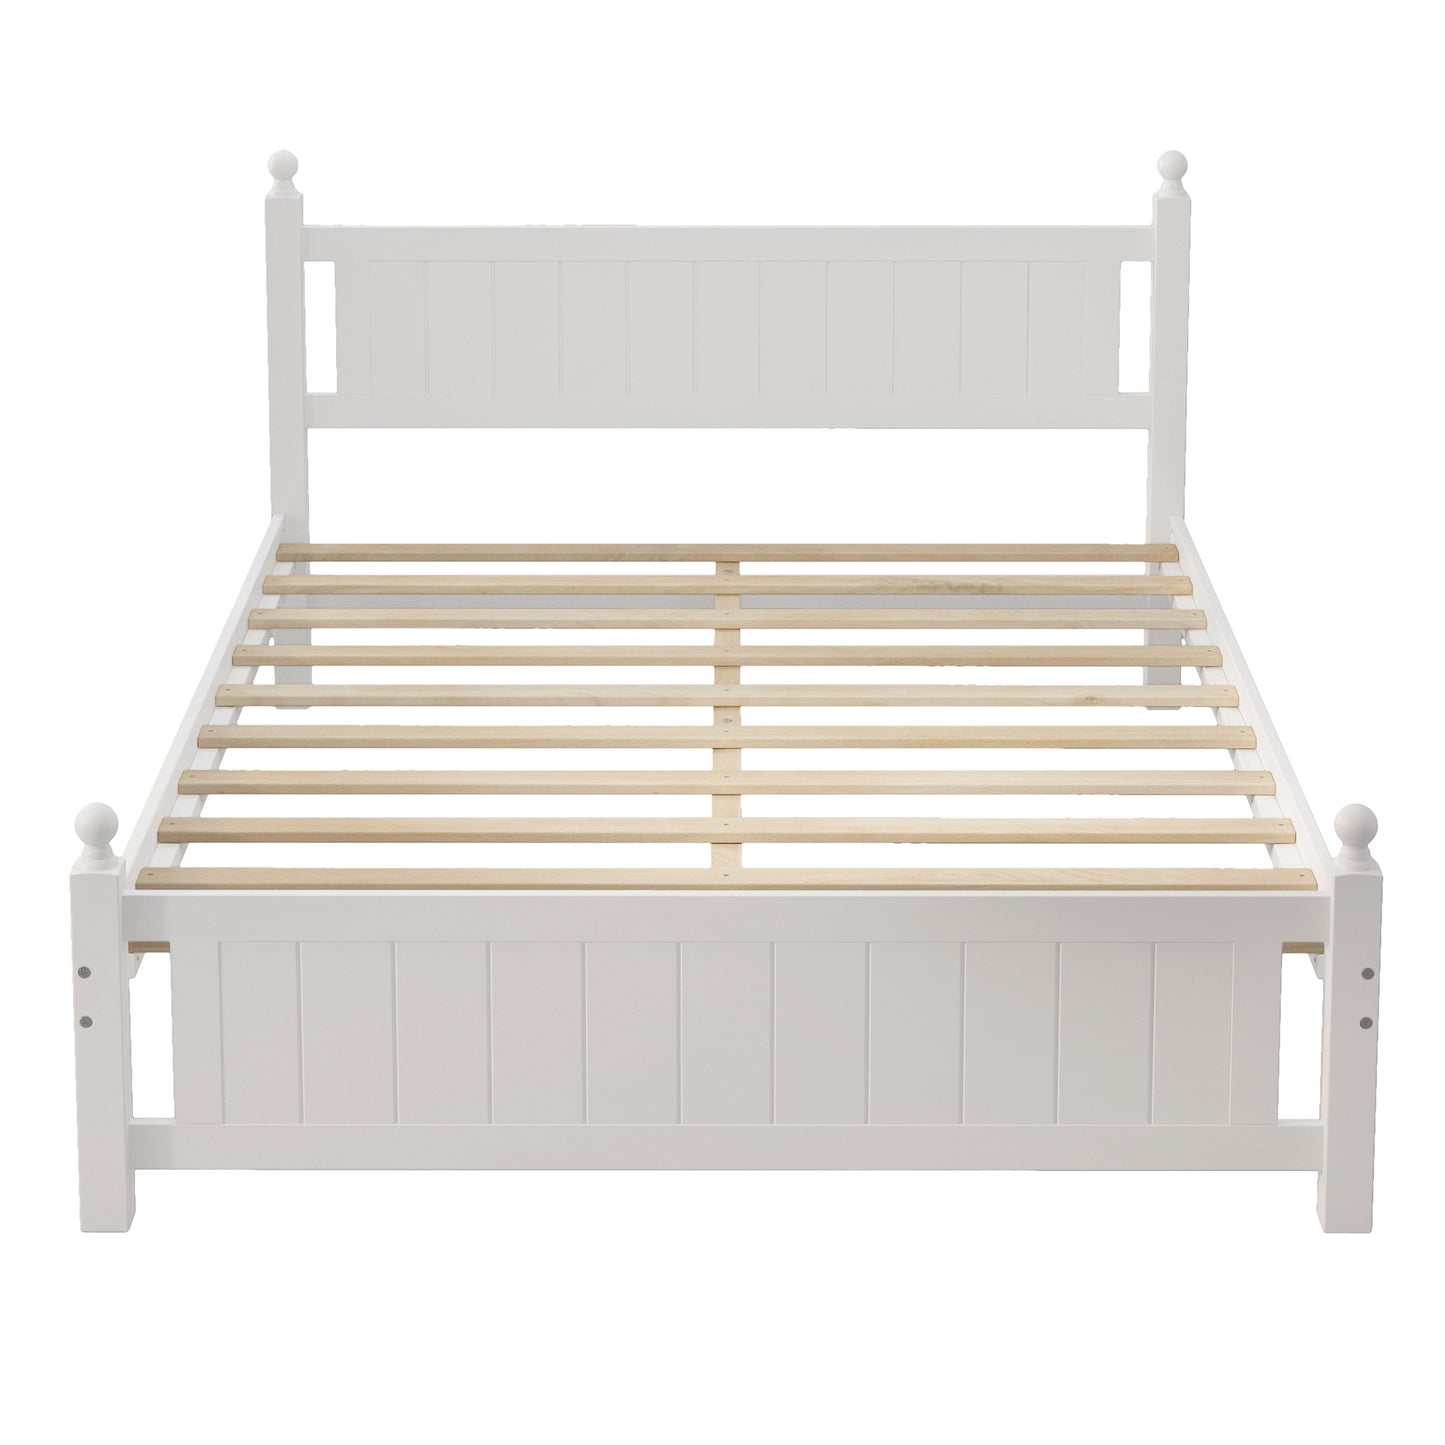 Queen Size Solid Wood Platform Bed Frame for Kids, Teens, Adults, No Need Box Spring, White